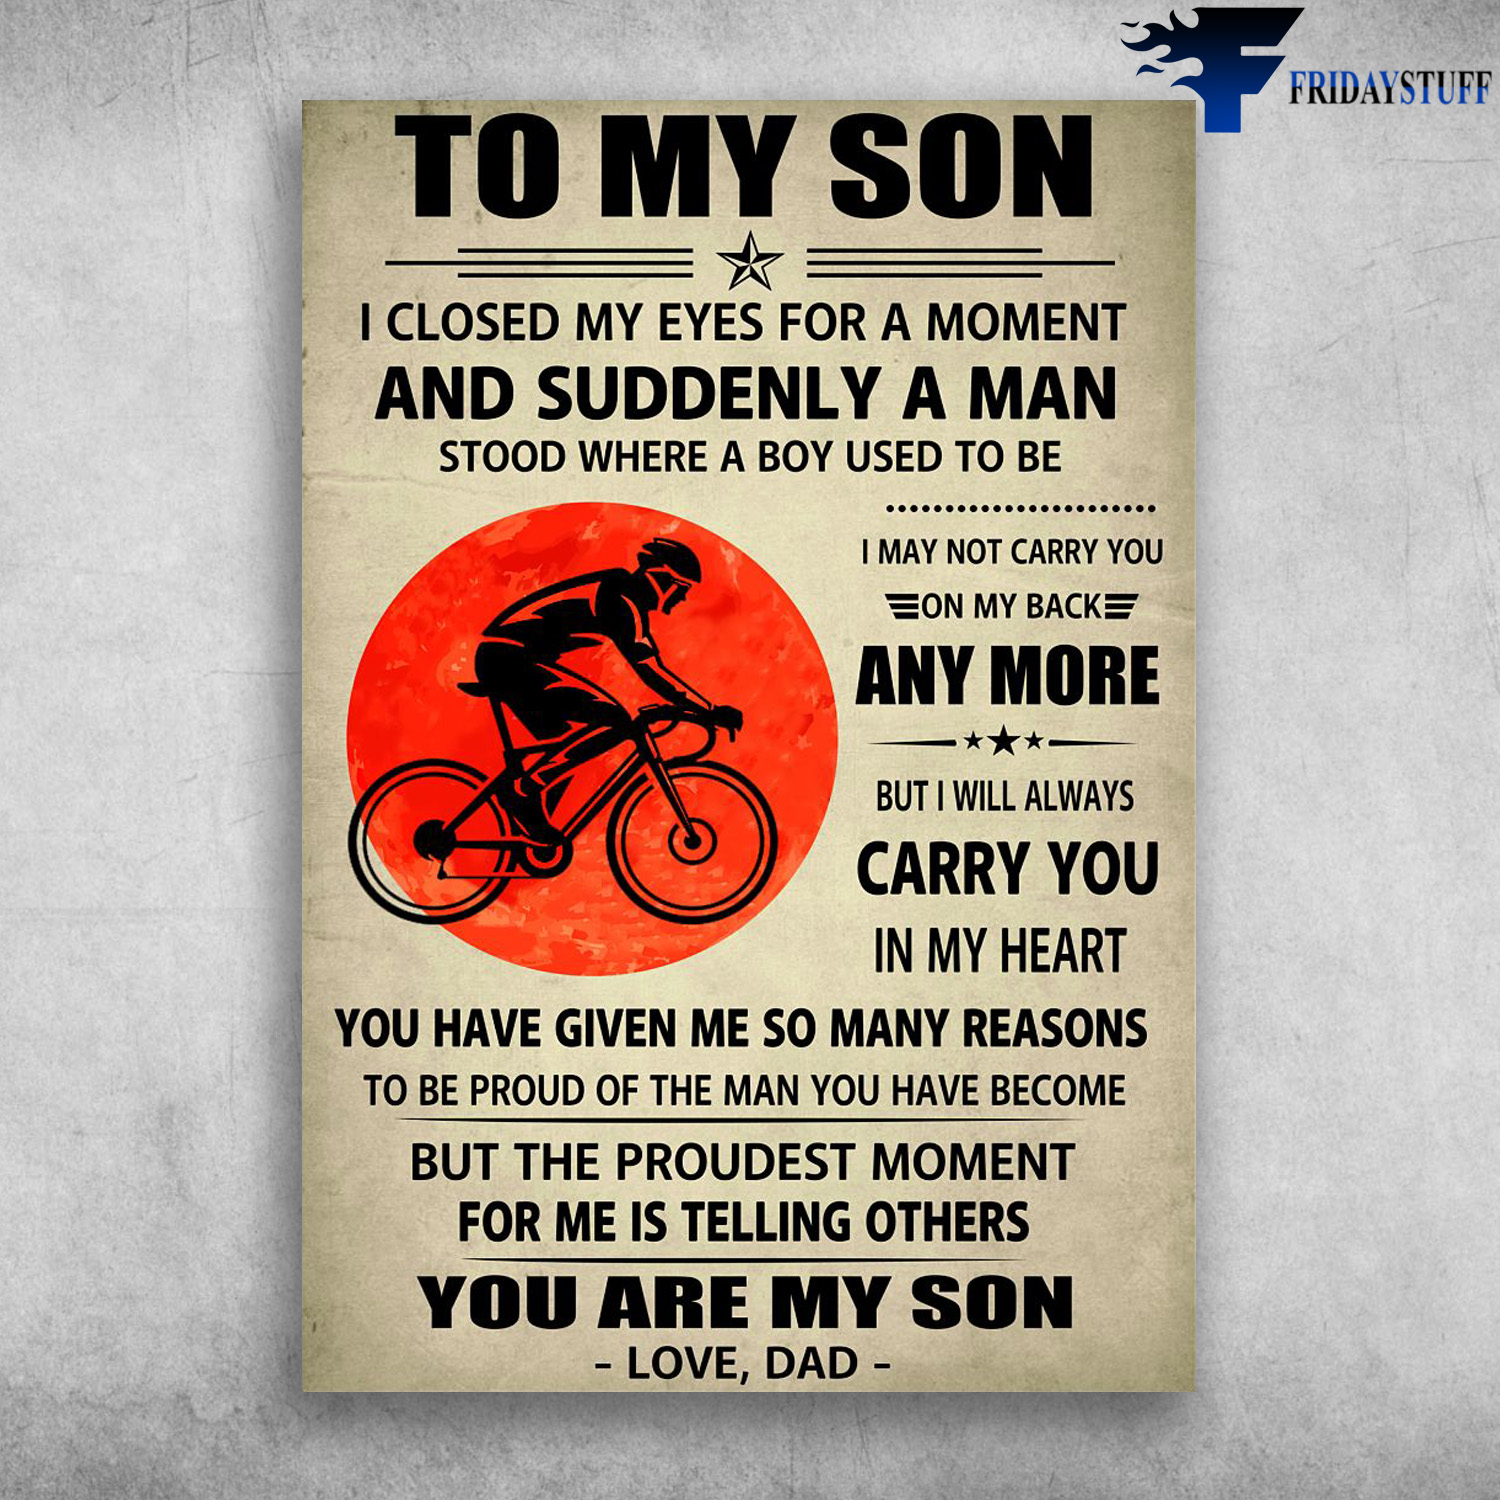 Cycling Man, Biker Lover - To My Son, I Closed My Eyes For A Moment, And Suddenly A Man, Stood Where A Boy Used To Be, I May Not Carry You, On My Back Anymore